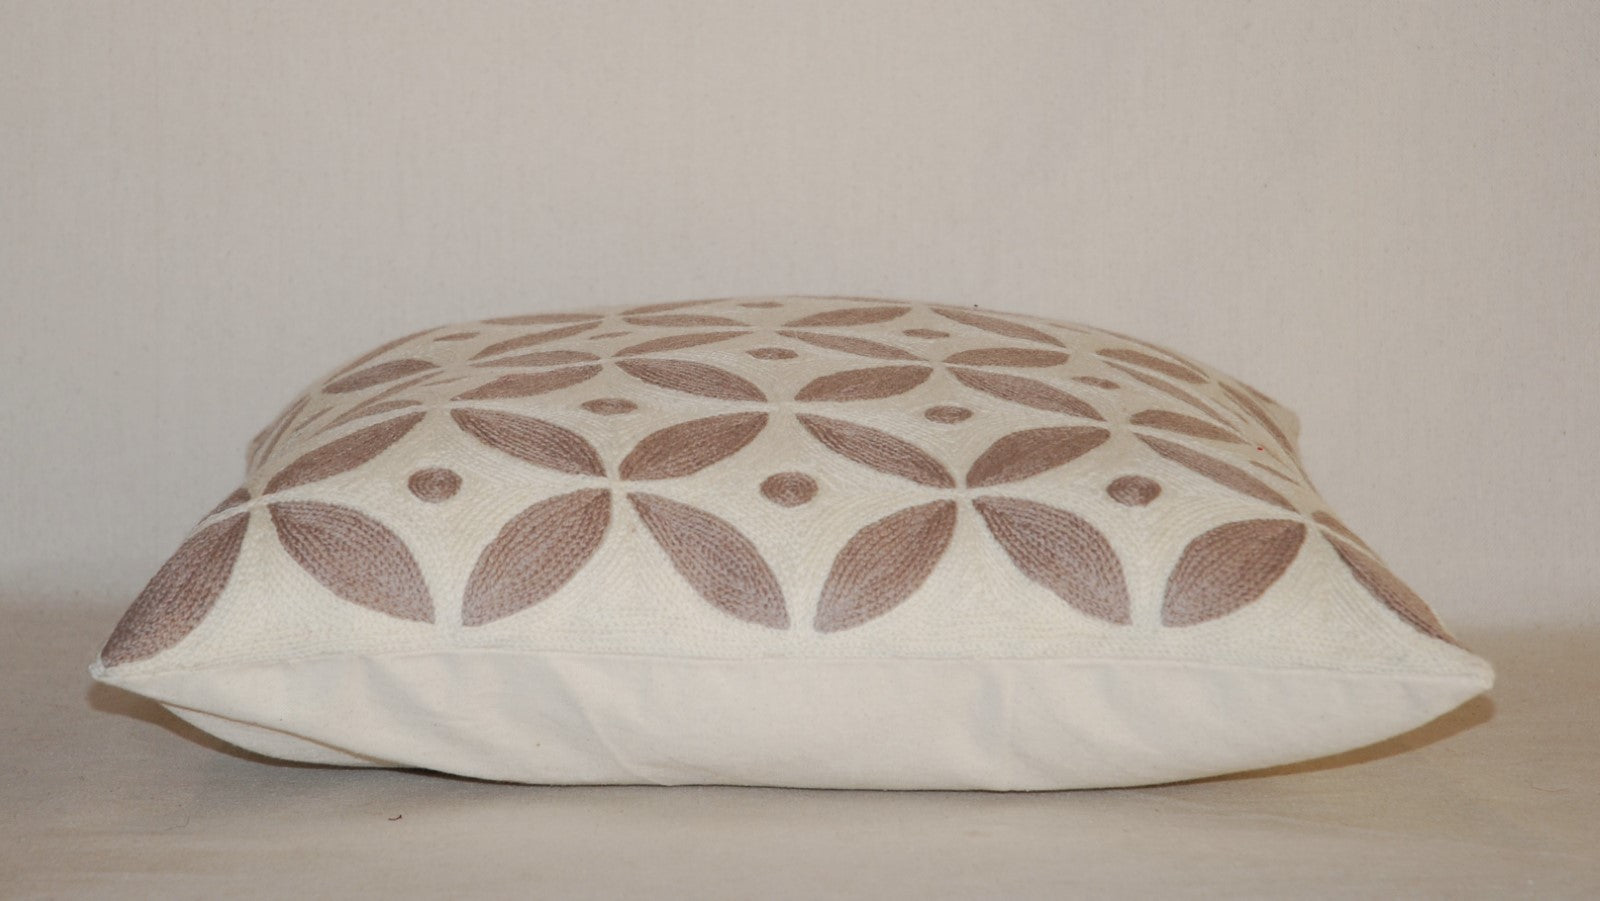 Crewel Cushion Cover Throw Pillow, Beige and White Embroidery #CW-1105